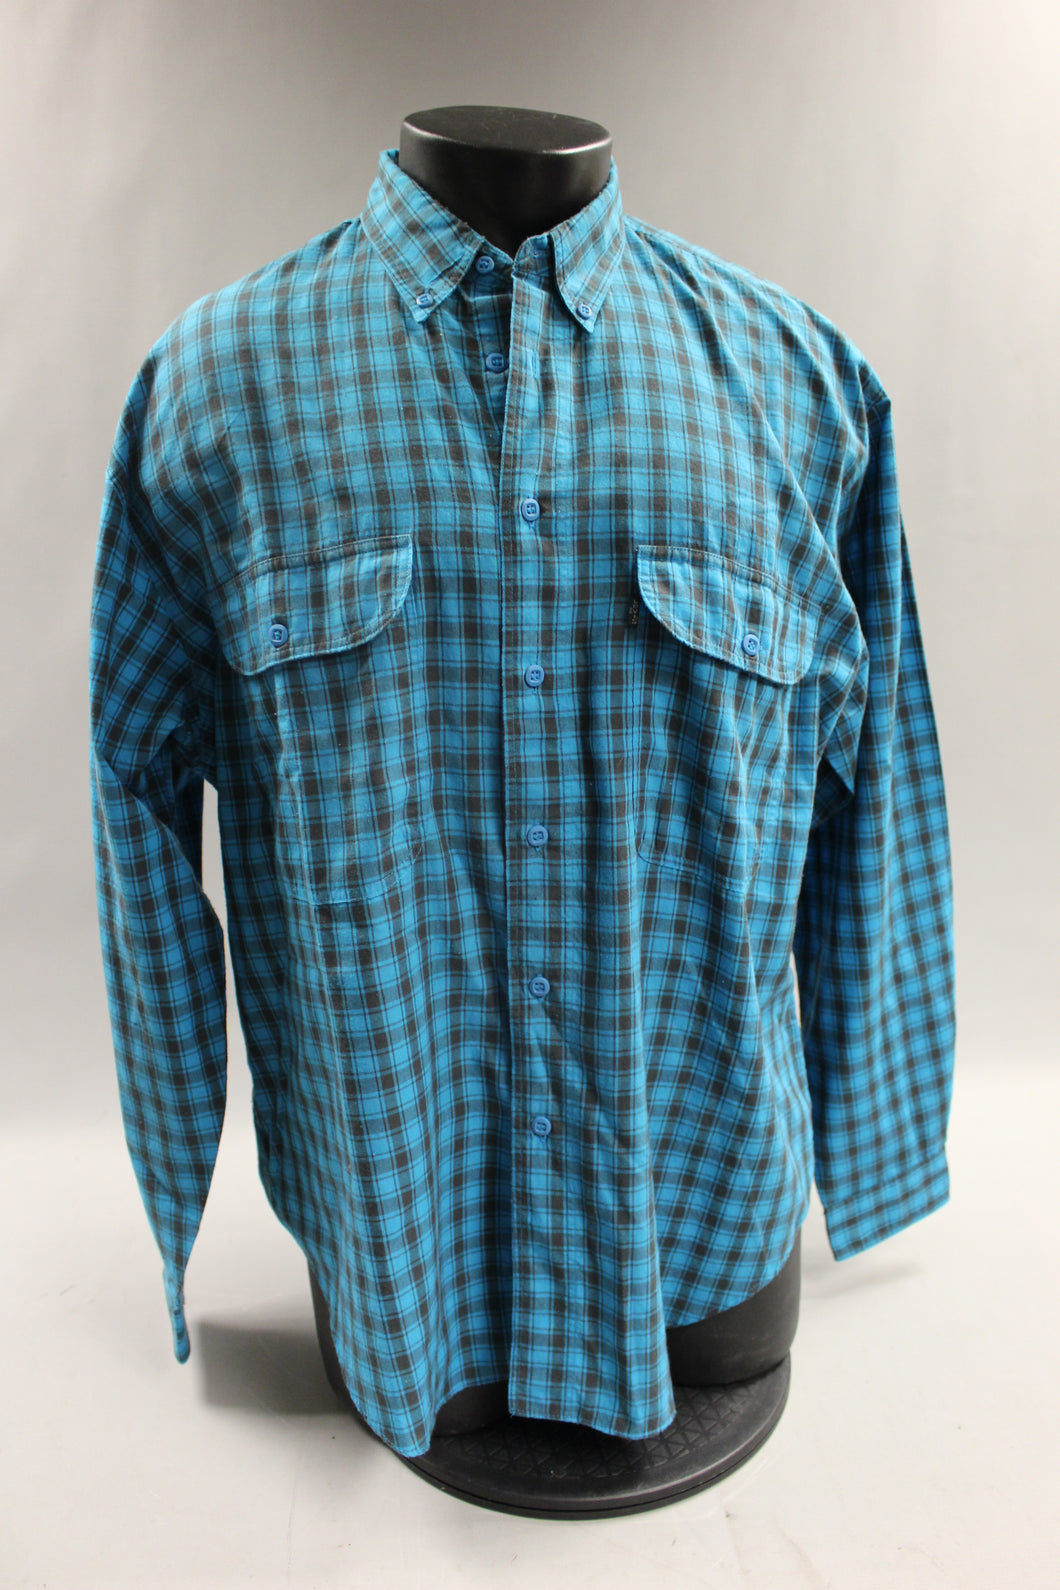 Levi's Silver Label Men's Long Sleeve Shirt - Size:: XL - Used